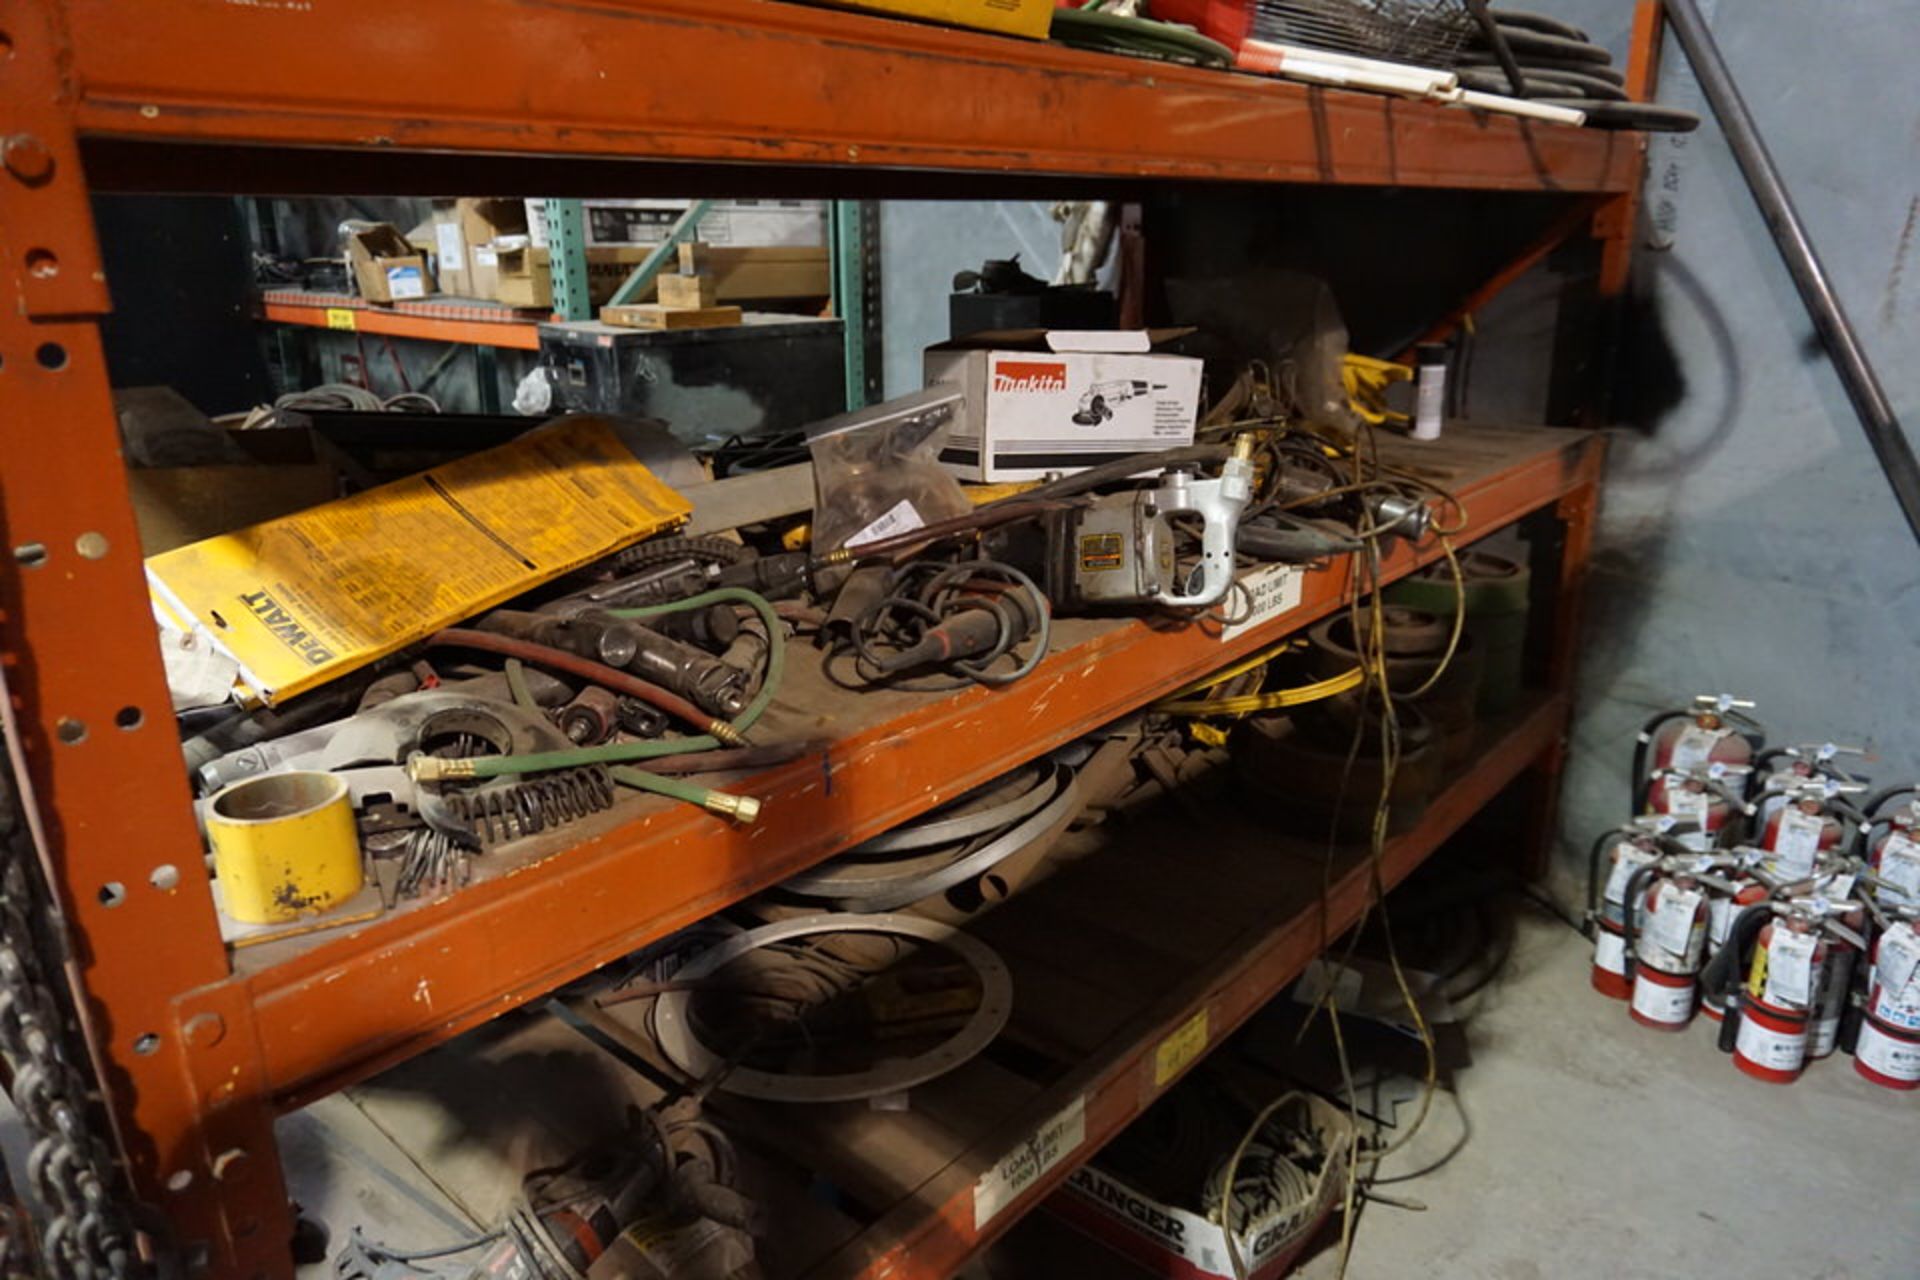 CONT OF TOOL CRIB: SPARE PARTS , SUPPLIES, SHELVING - Image 17 of 39